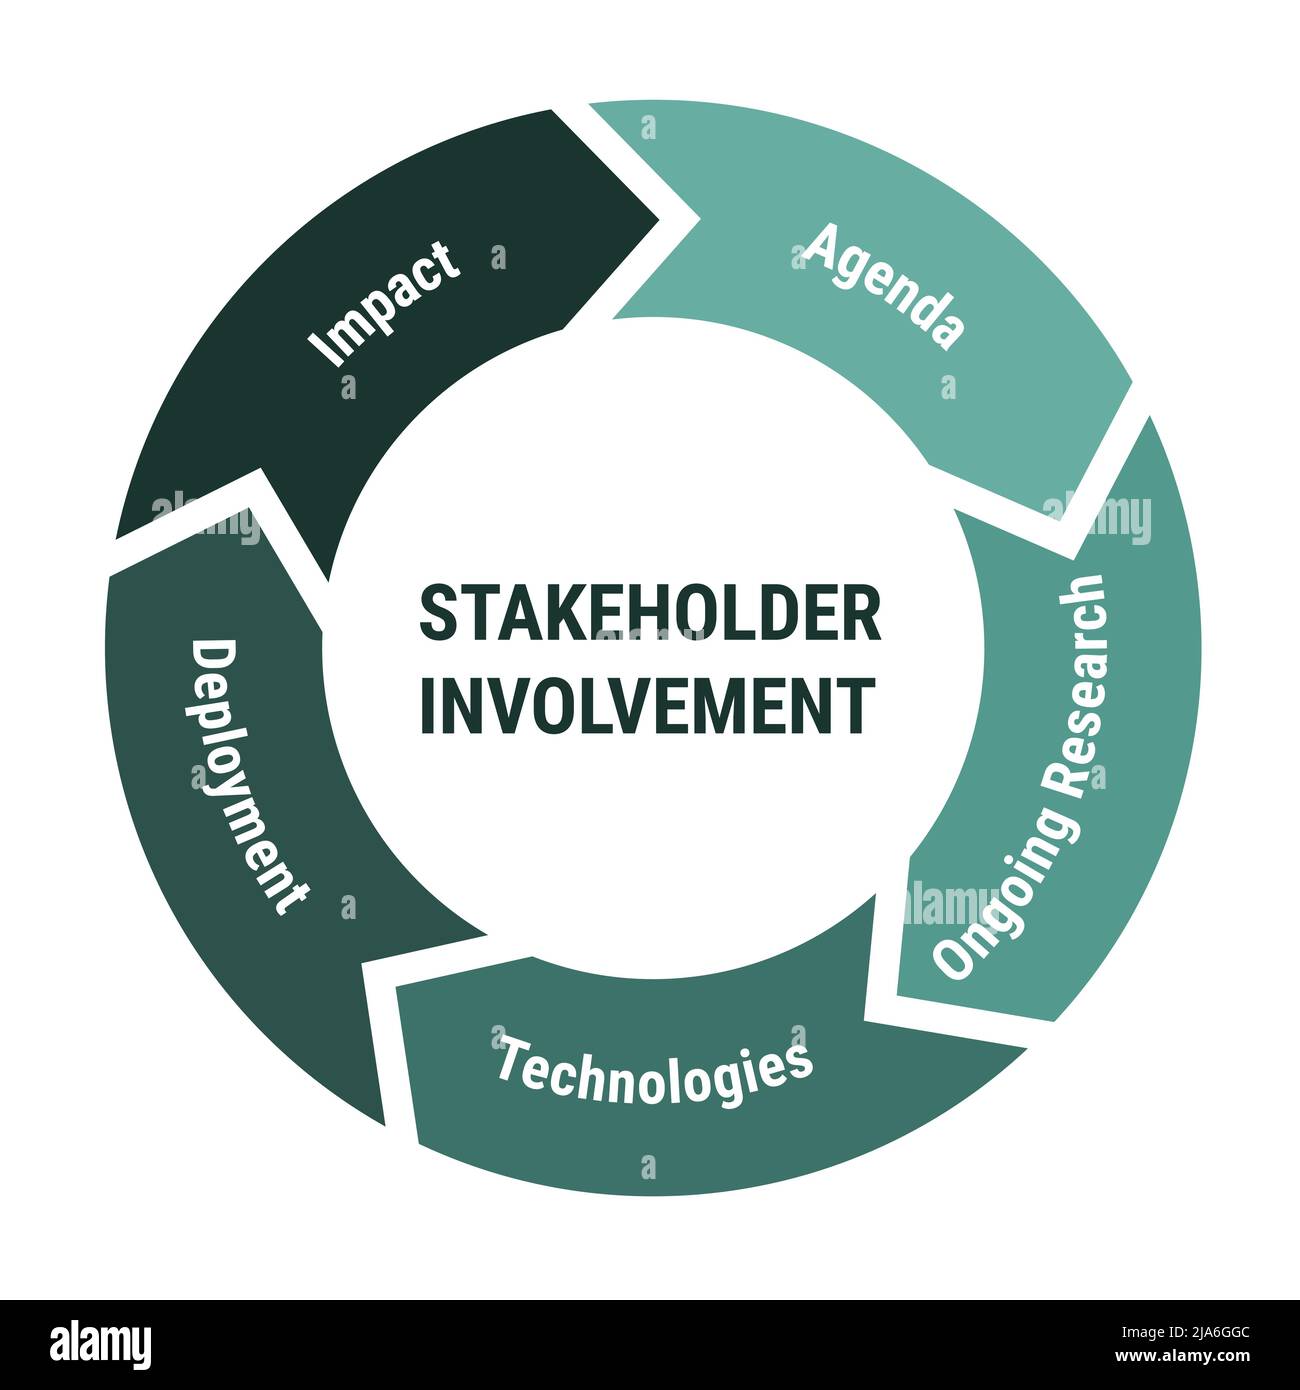 Stakeholder involvement lifecycle infographics. 5 arrows circle diagram with agenda, ongoing research and technologies, deployment and impact. Flat gr Stock Vector